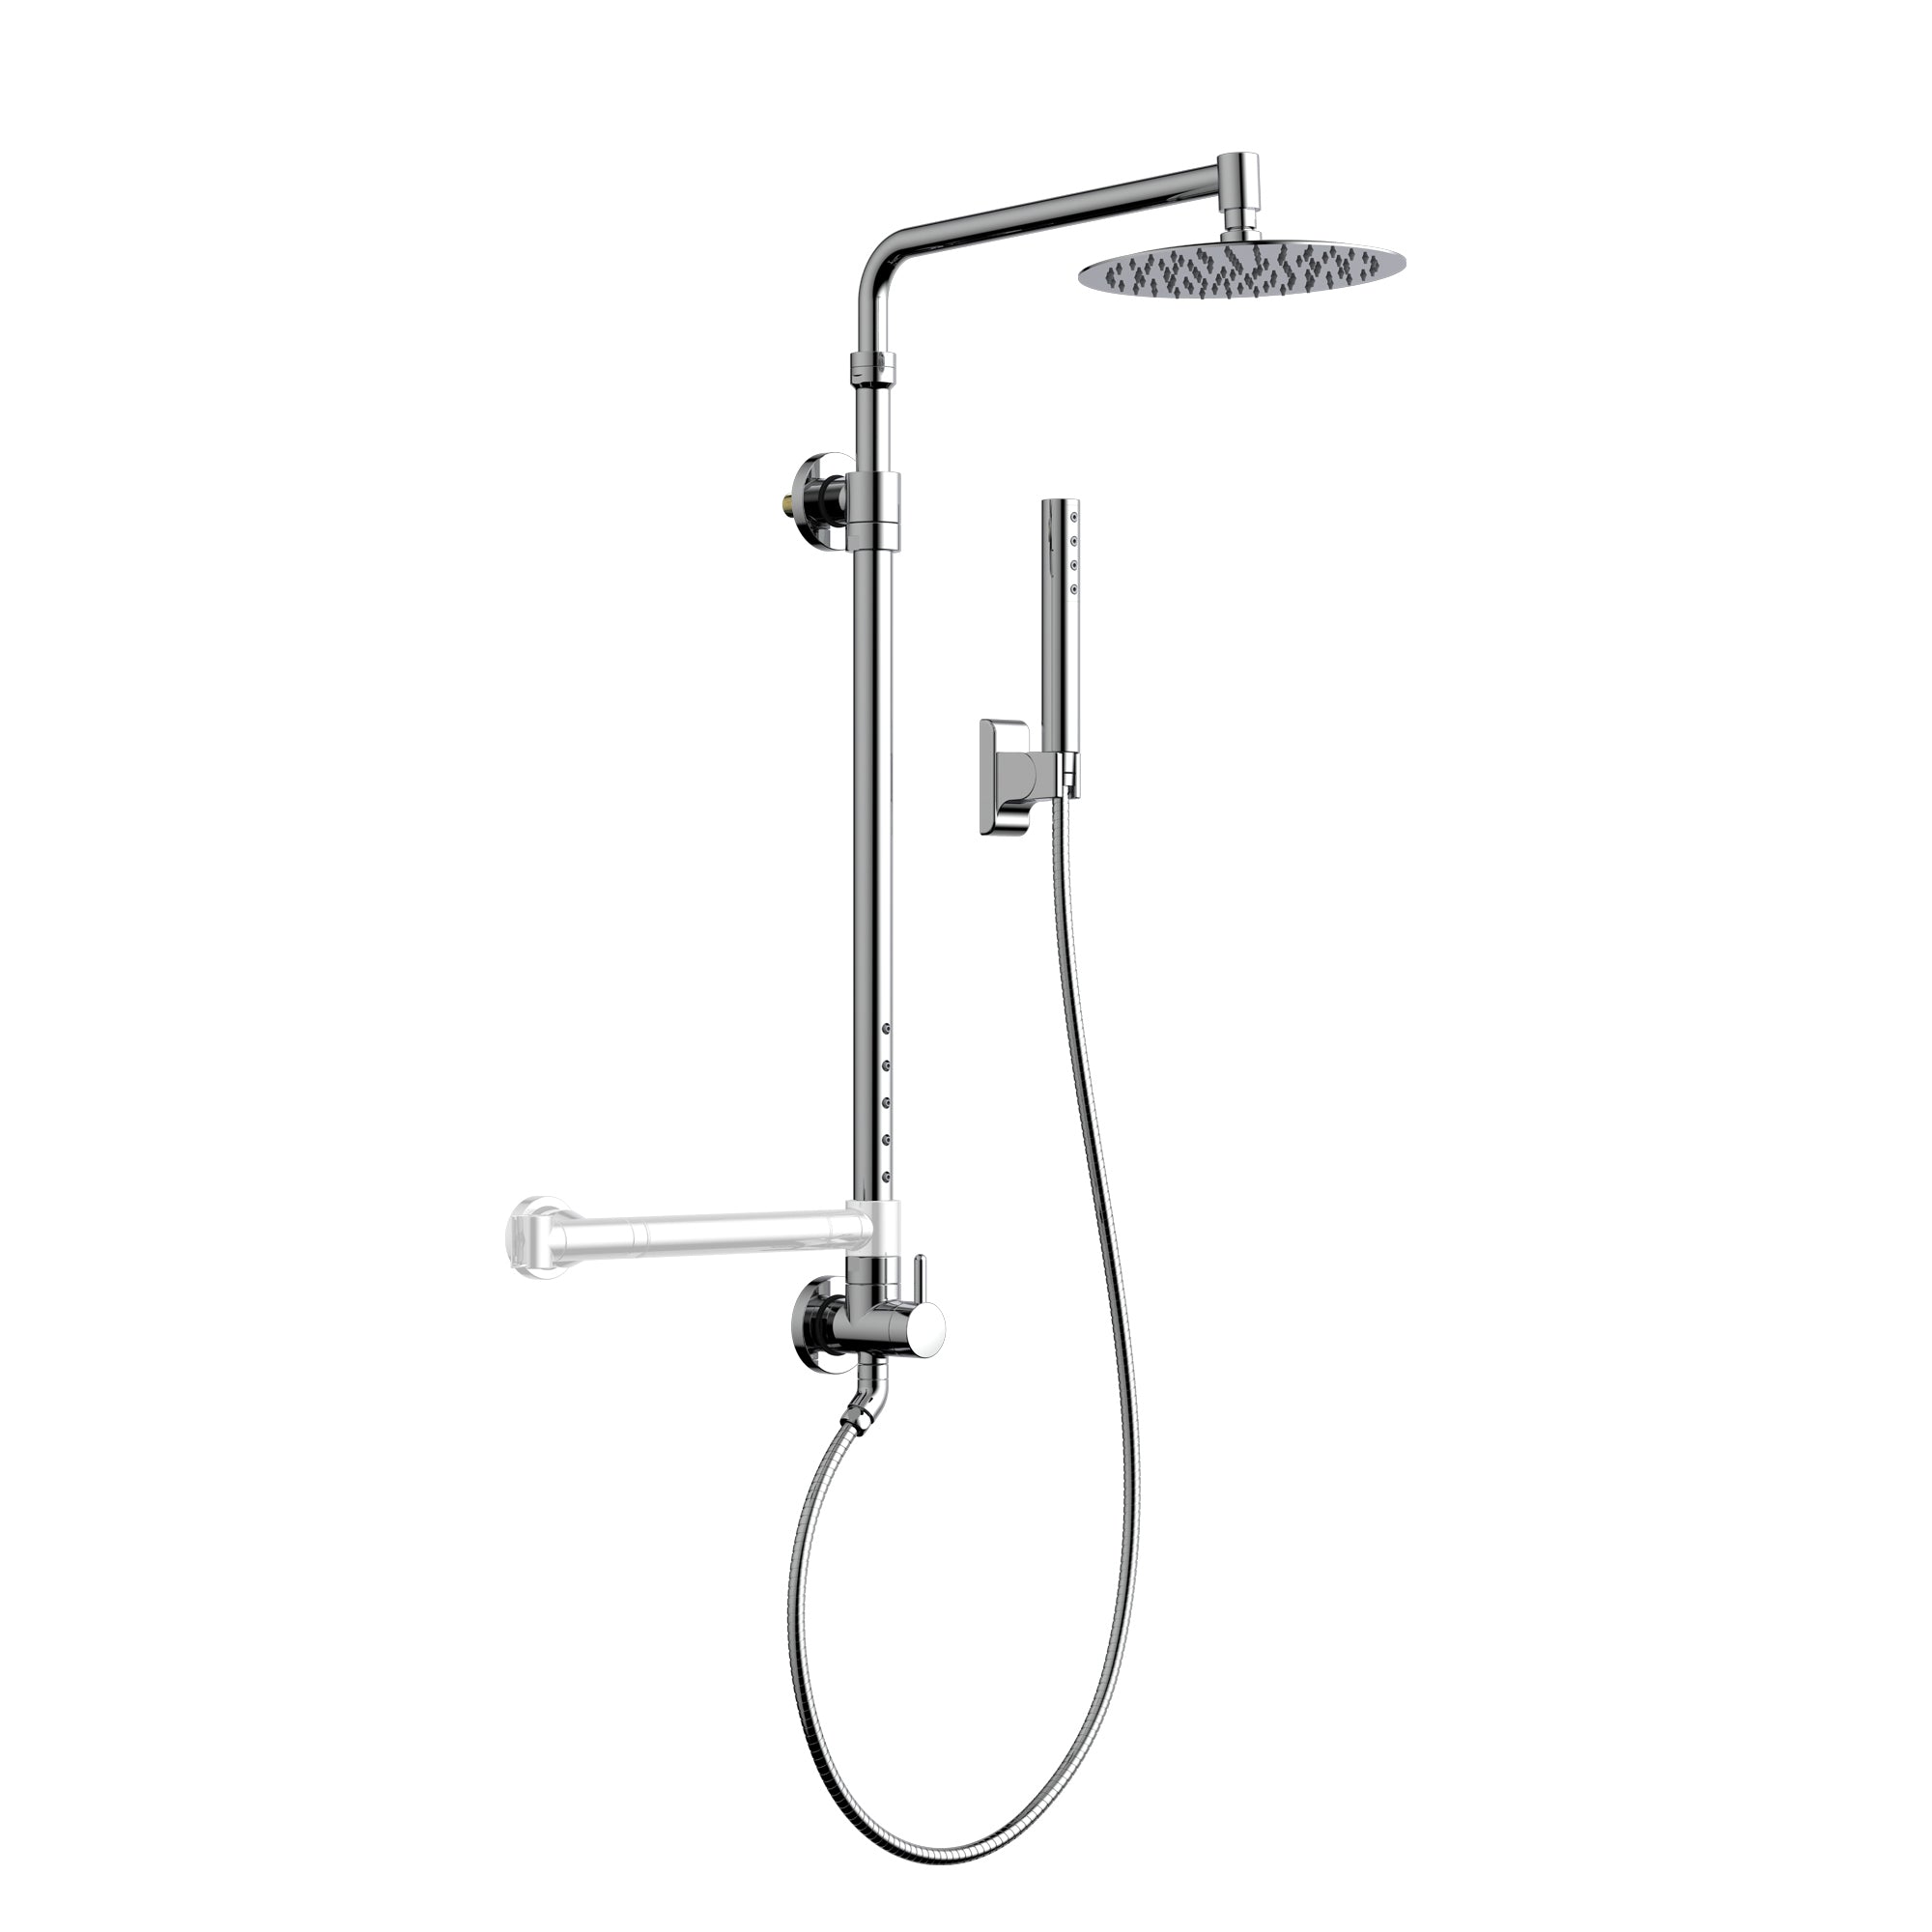 PULSE ShowerSpas Shower System - Atlantis Shower System - All brass body and fixtures - 10-inch rain showerhead along with the 5 PULSE Power Nozzles, hand shower holds by the hand shower holder and Brass diverter - Polished Chrome - 1059 - Vital Hydrotherapy